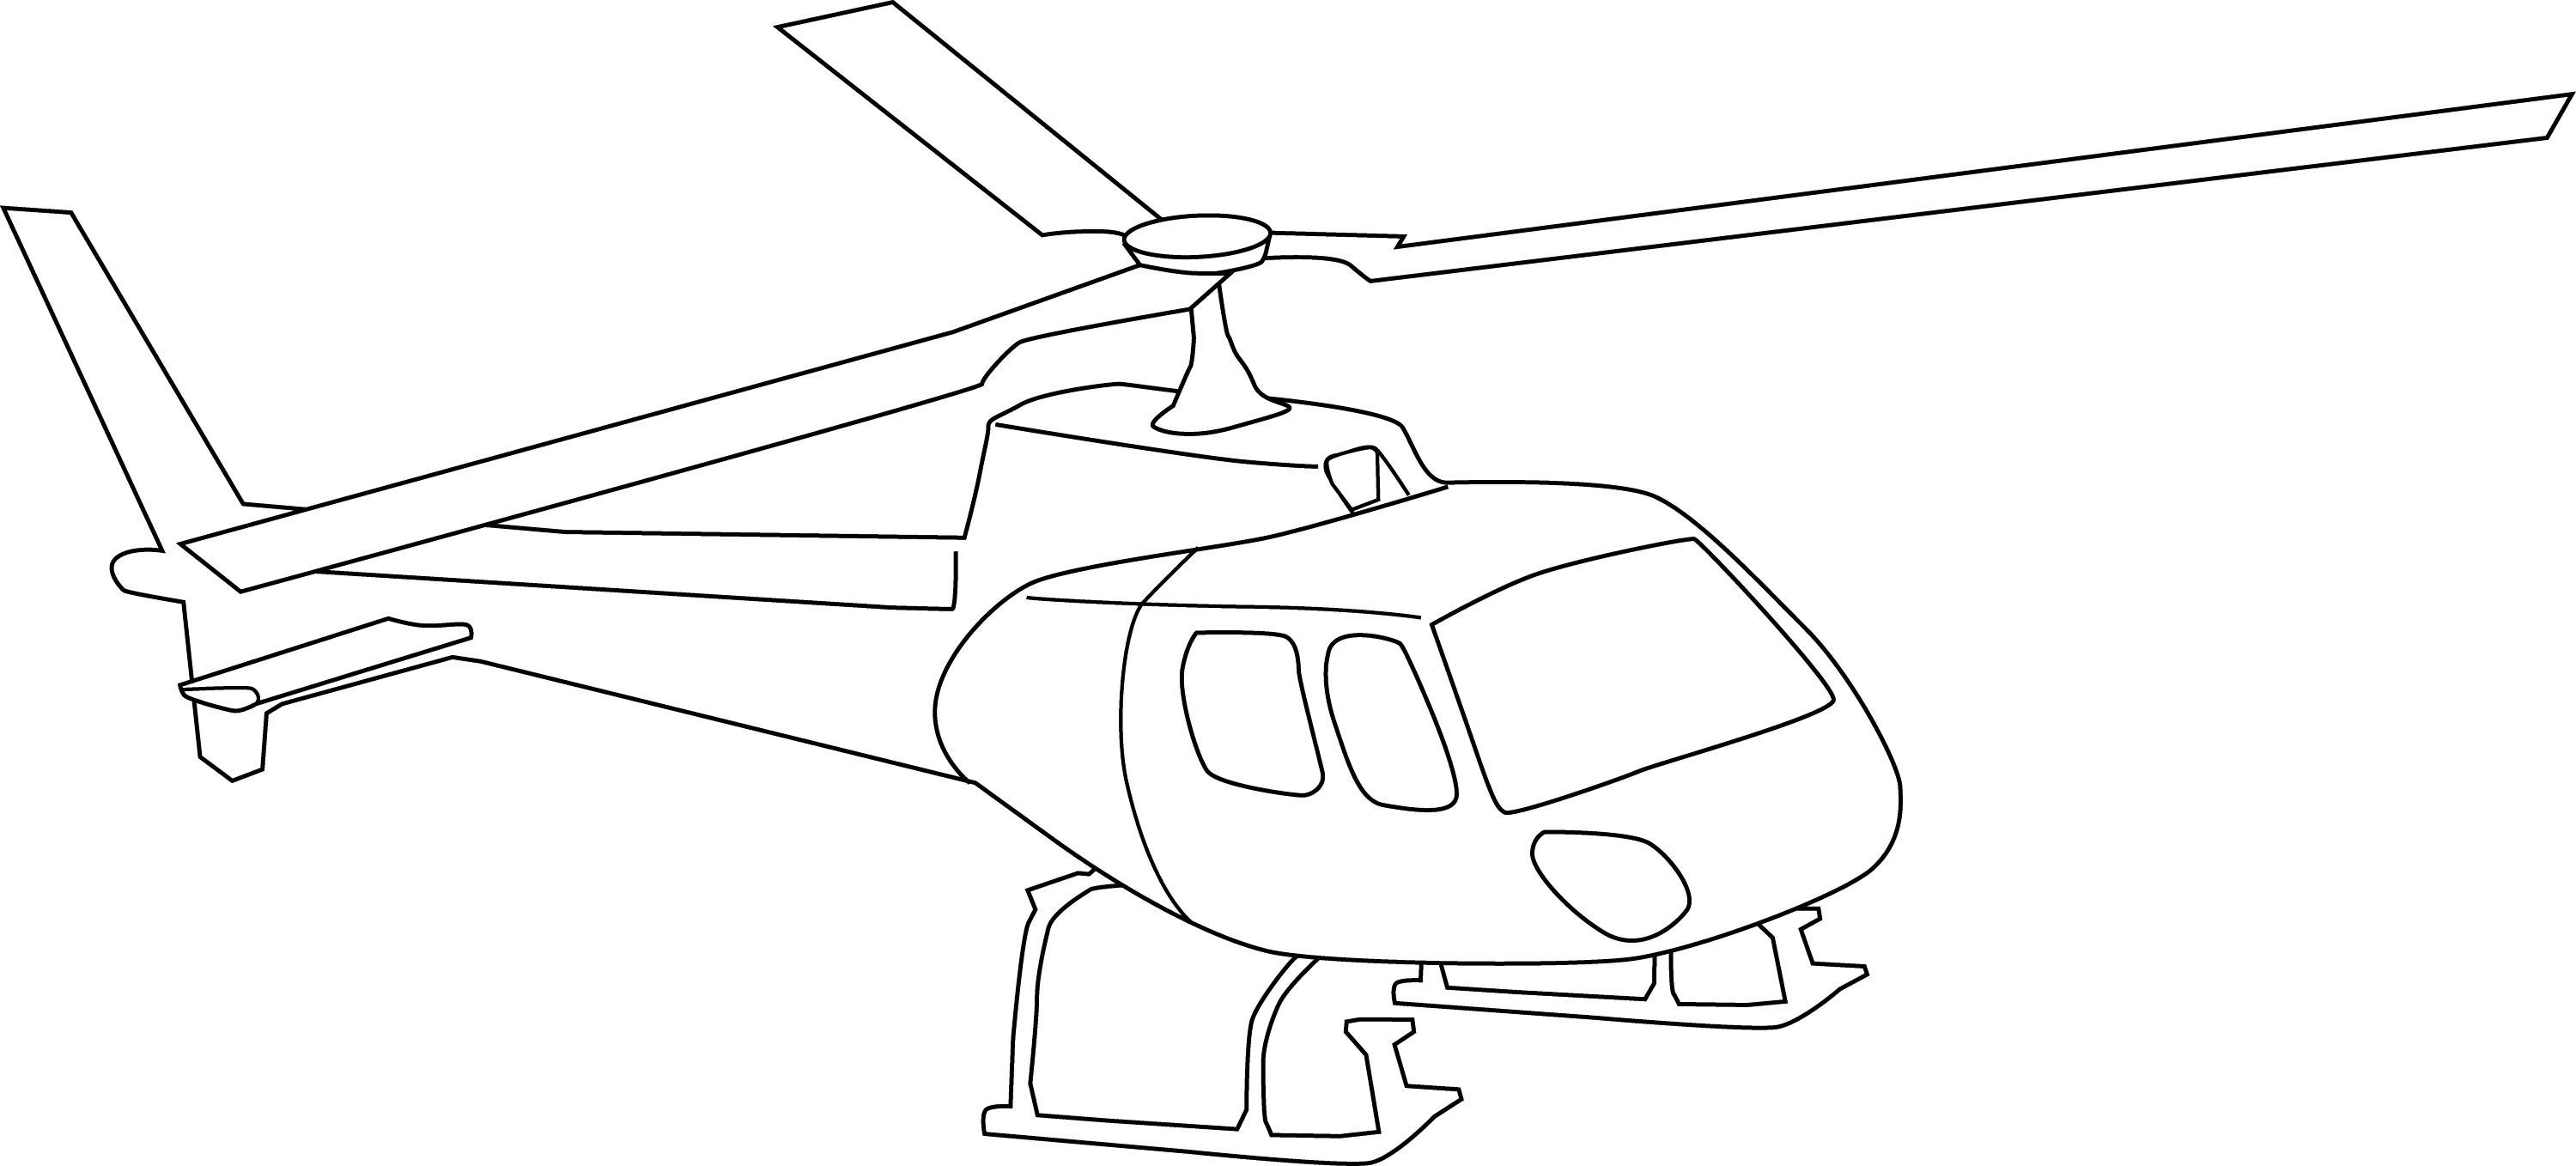 free clipart cartoon helicopter - photo #46